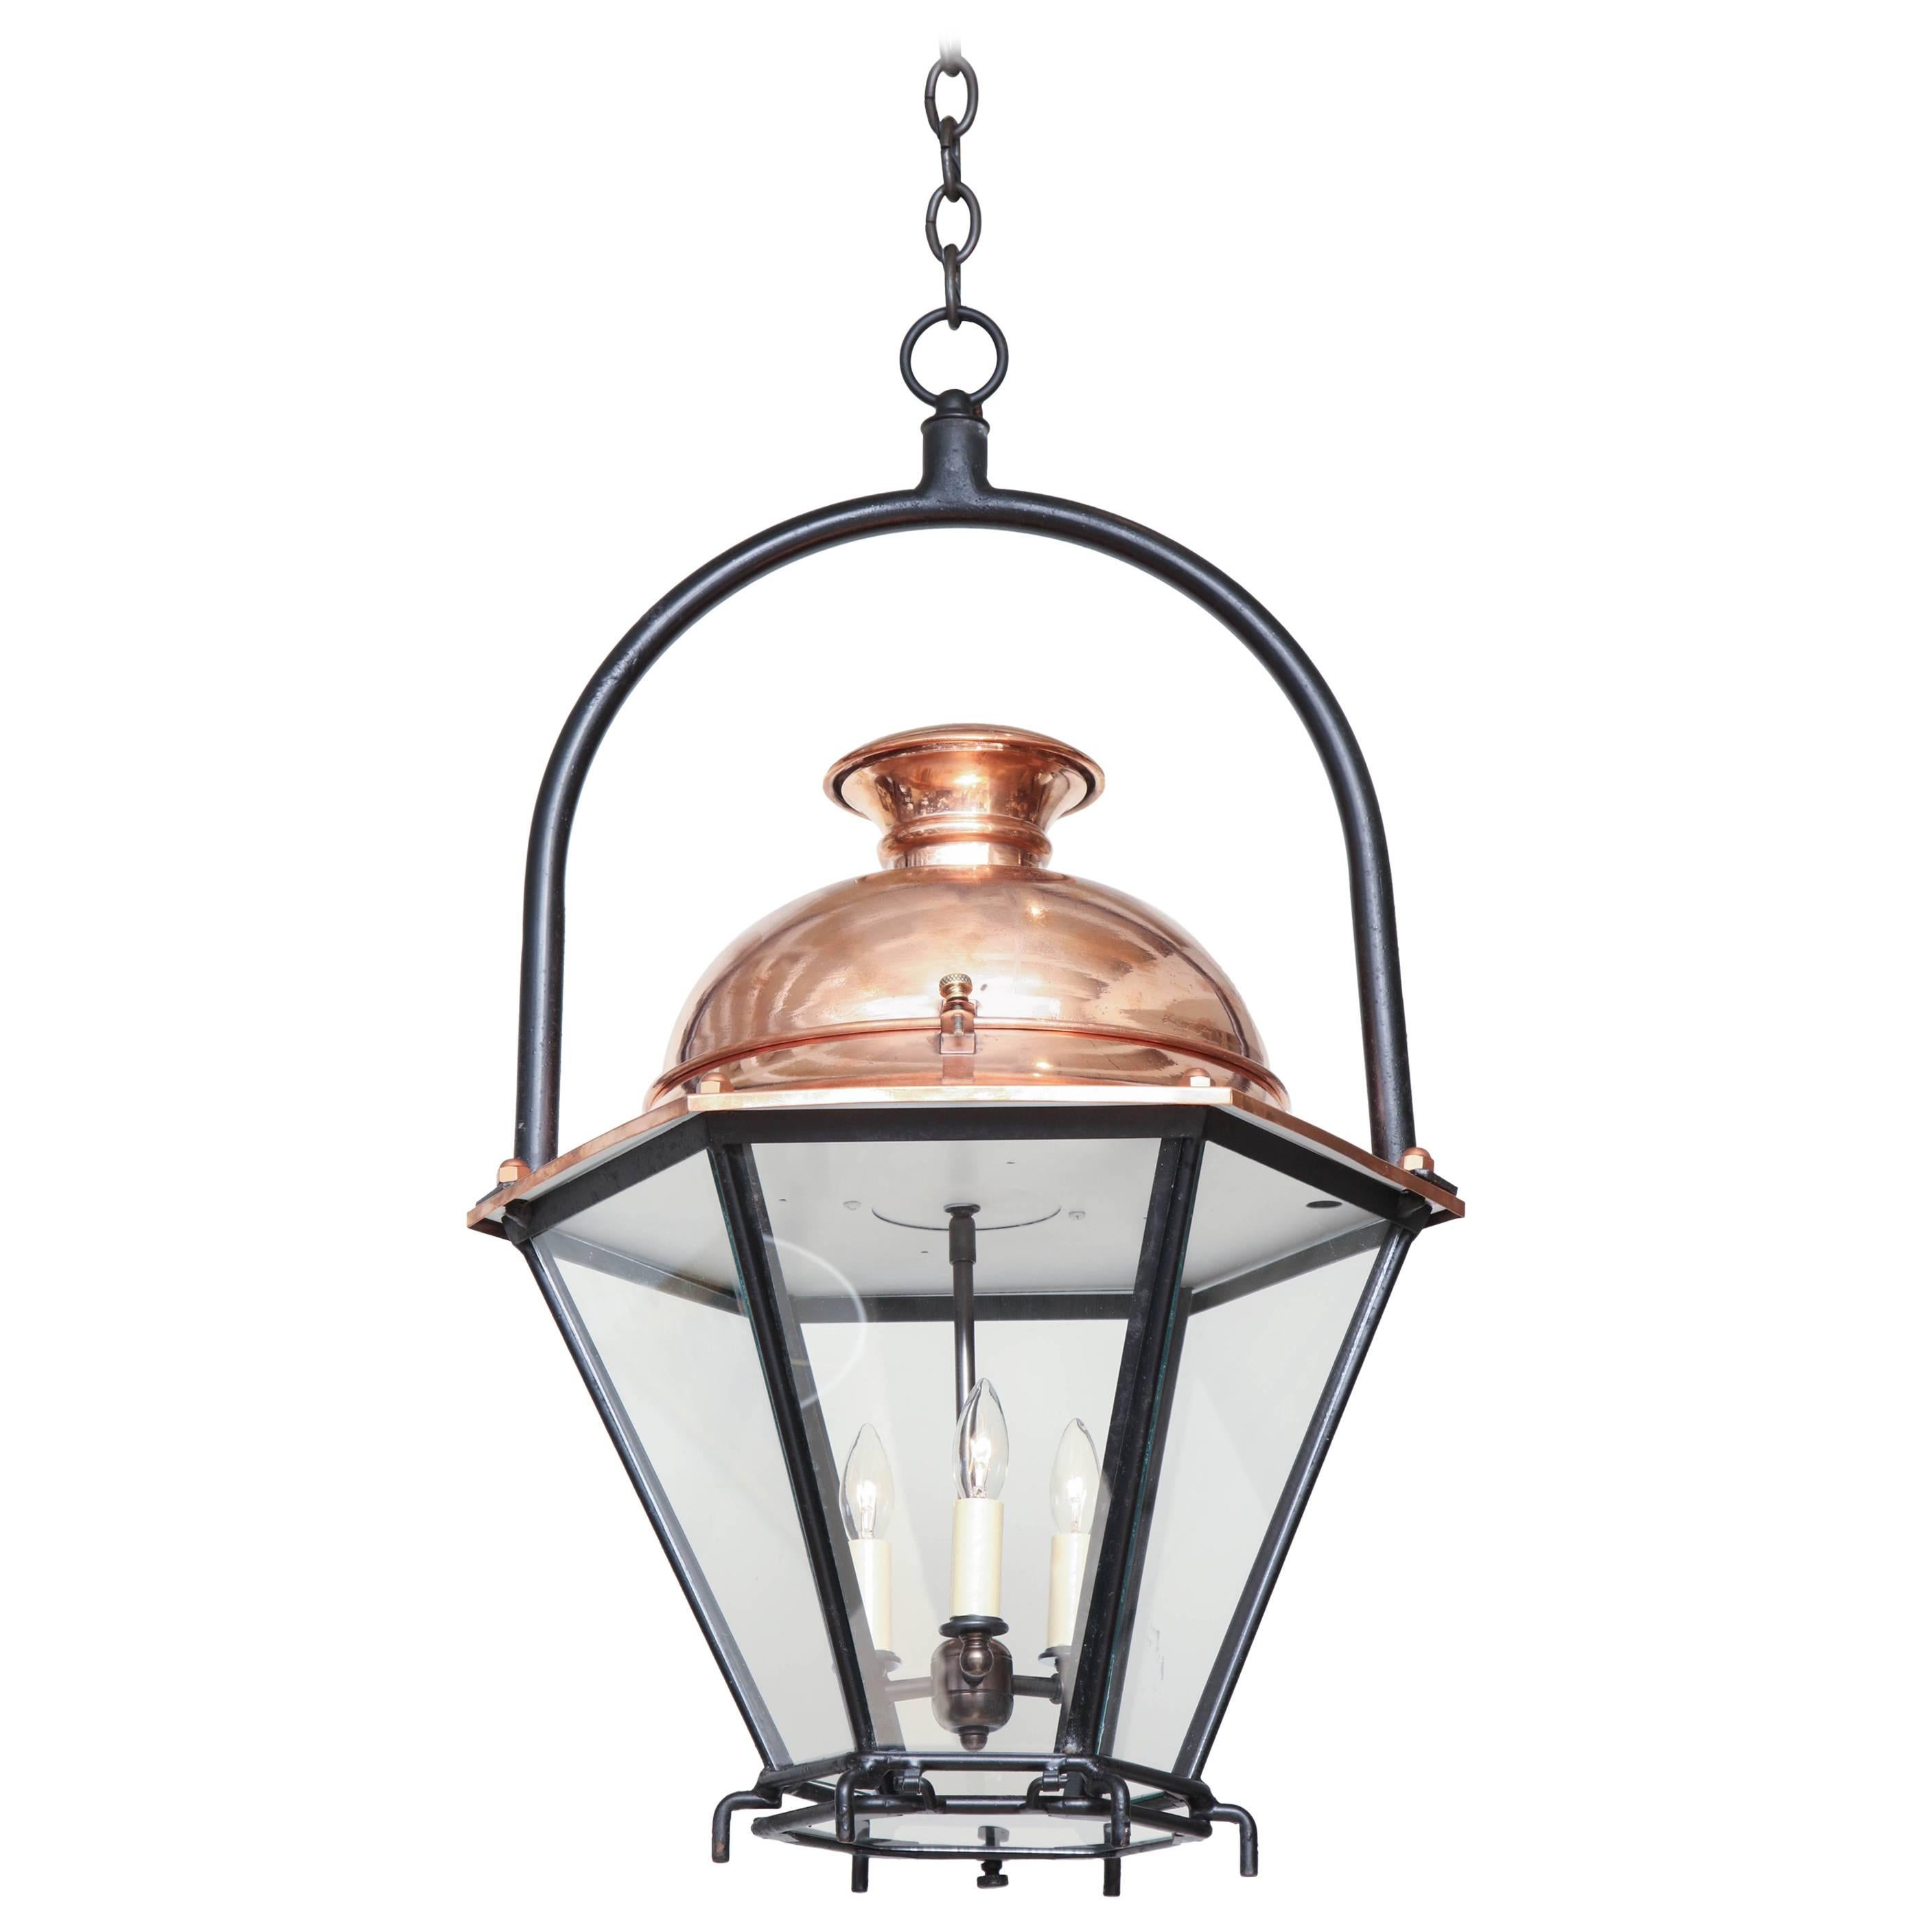 20th Century Copper and Glass Lantern/Pendant with Iron Ring Hanger, circa 1900 For Sale